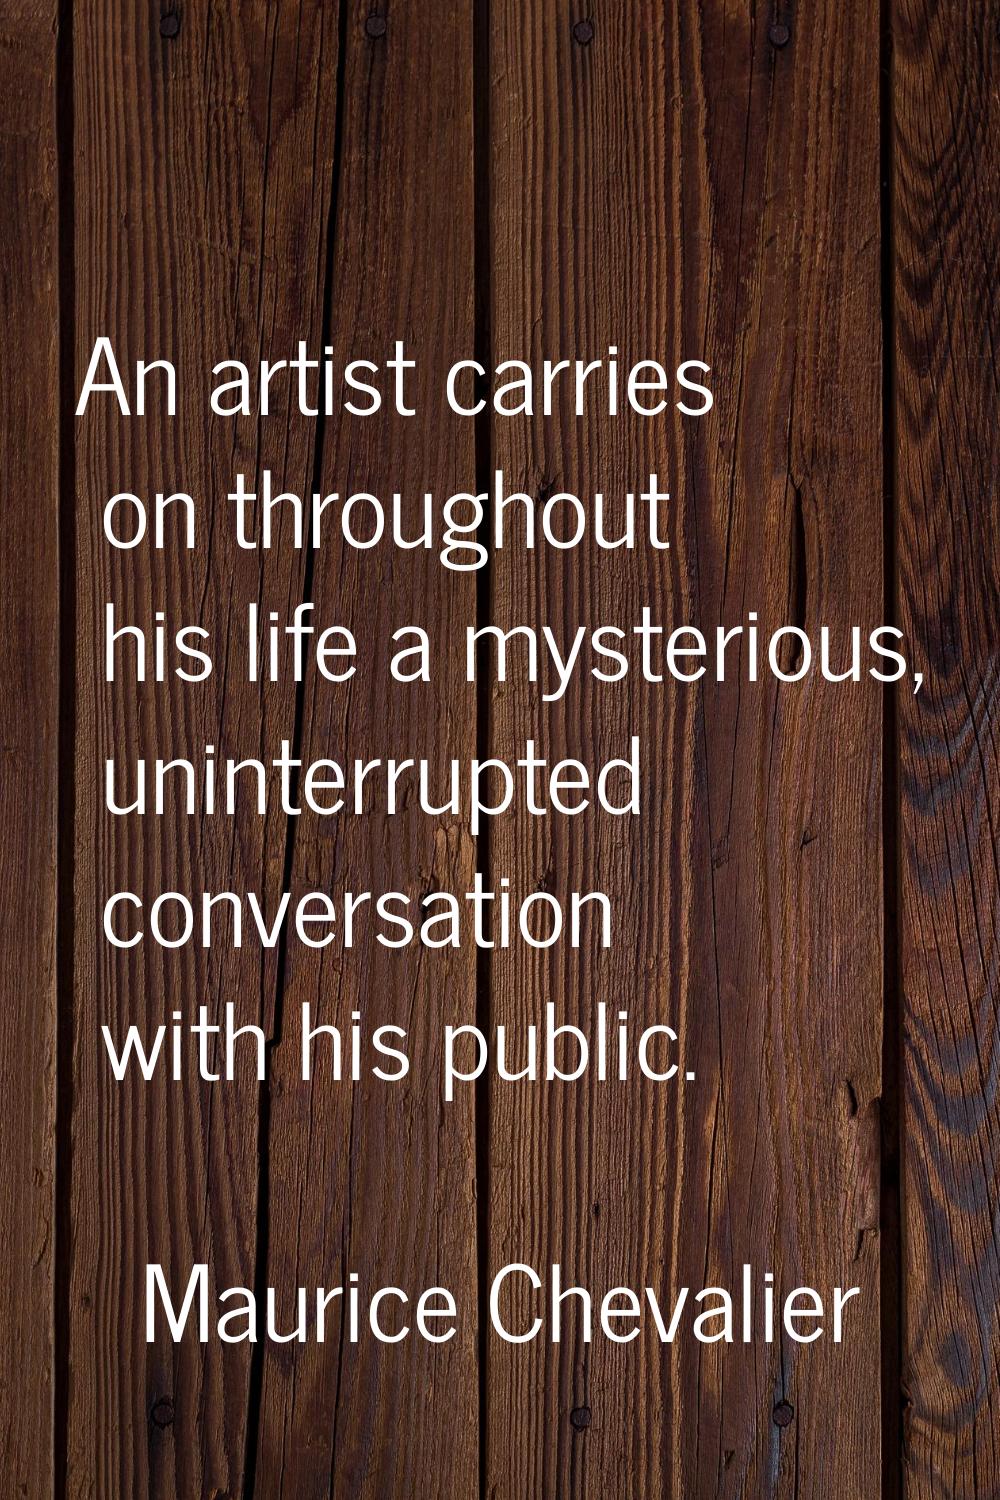 An artist carries on throughout his life a mysterious, uninterrupted conversation with his public.